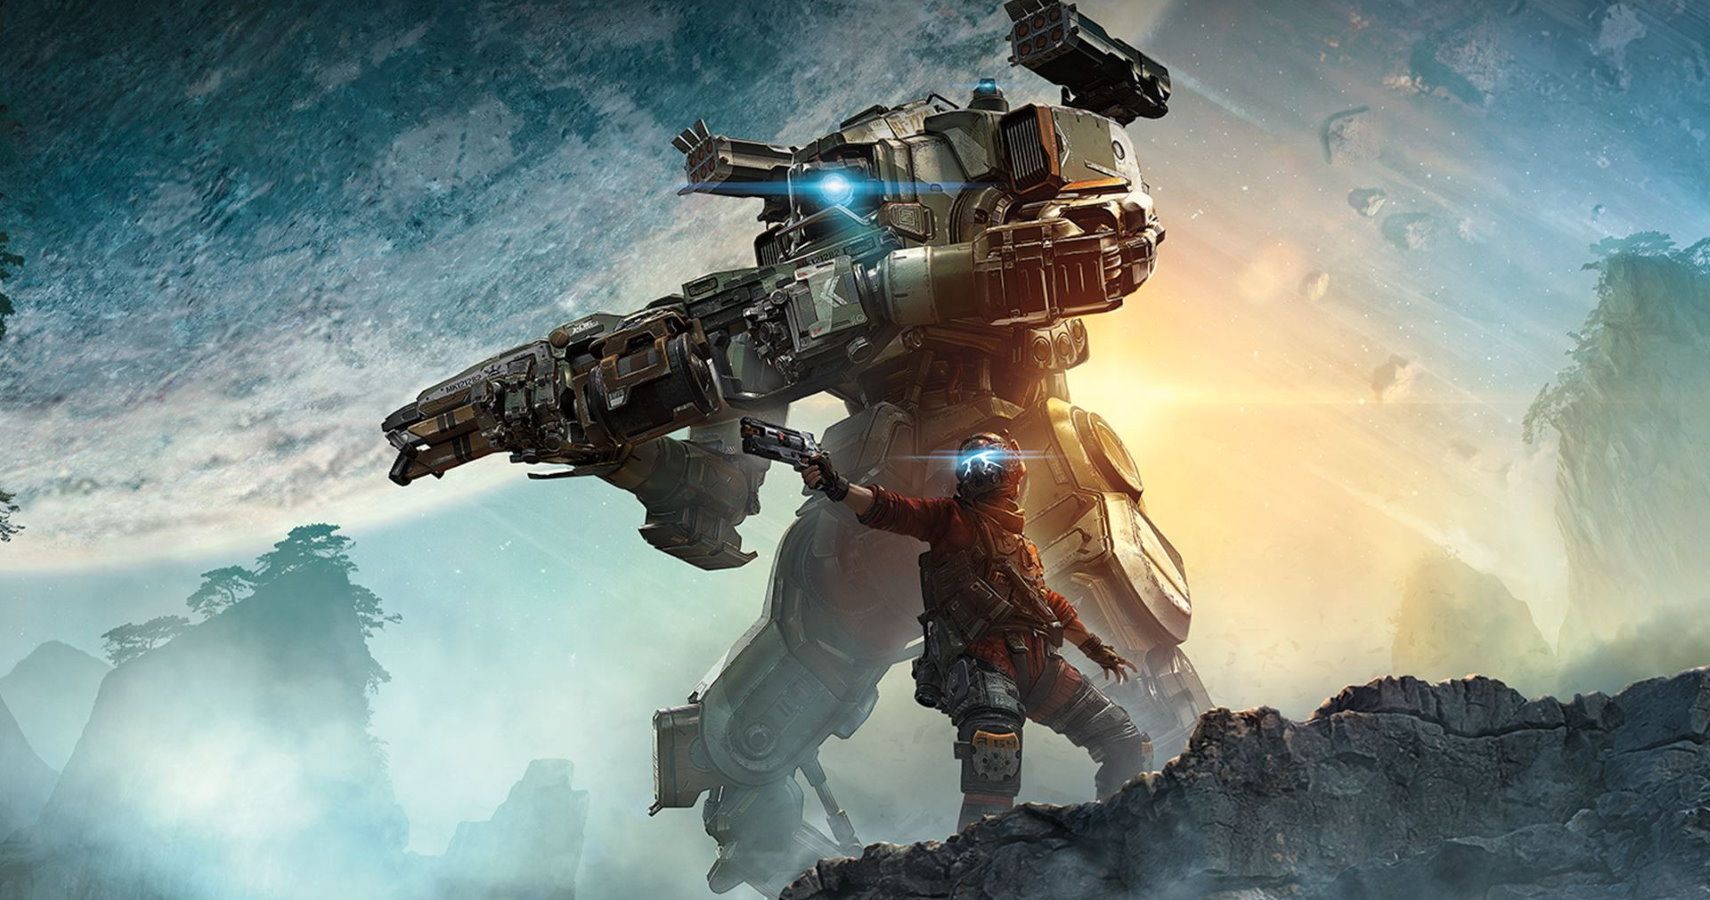 Titanfall 2 Is Free To Play This Weekend On Steam, So You Really Have